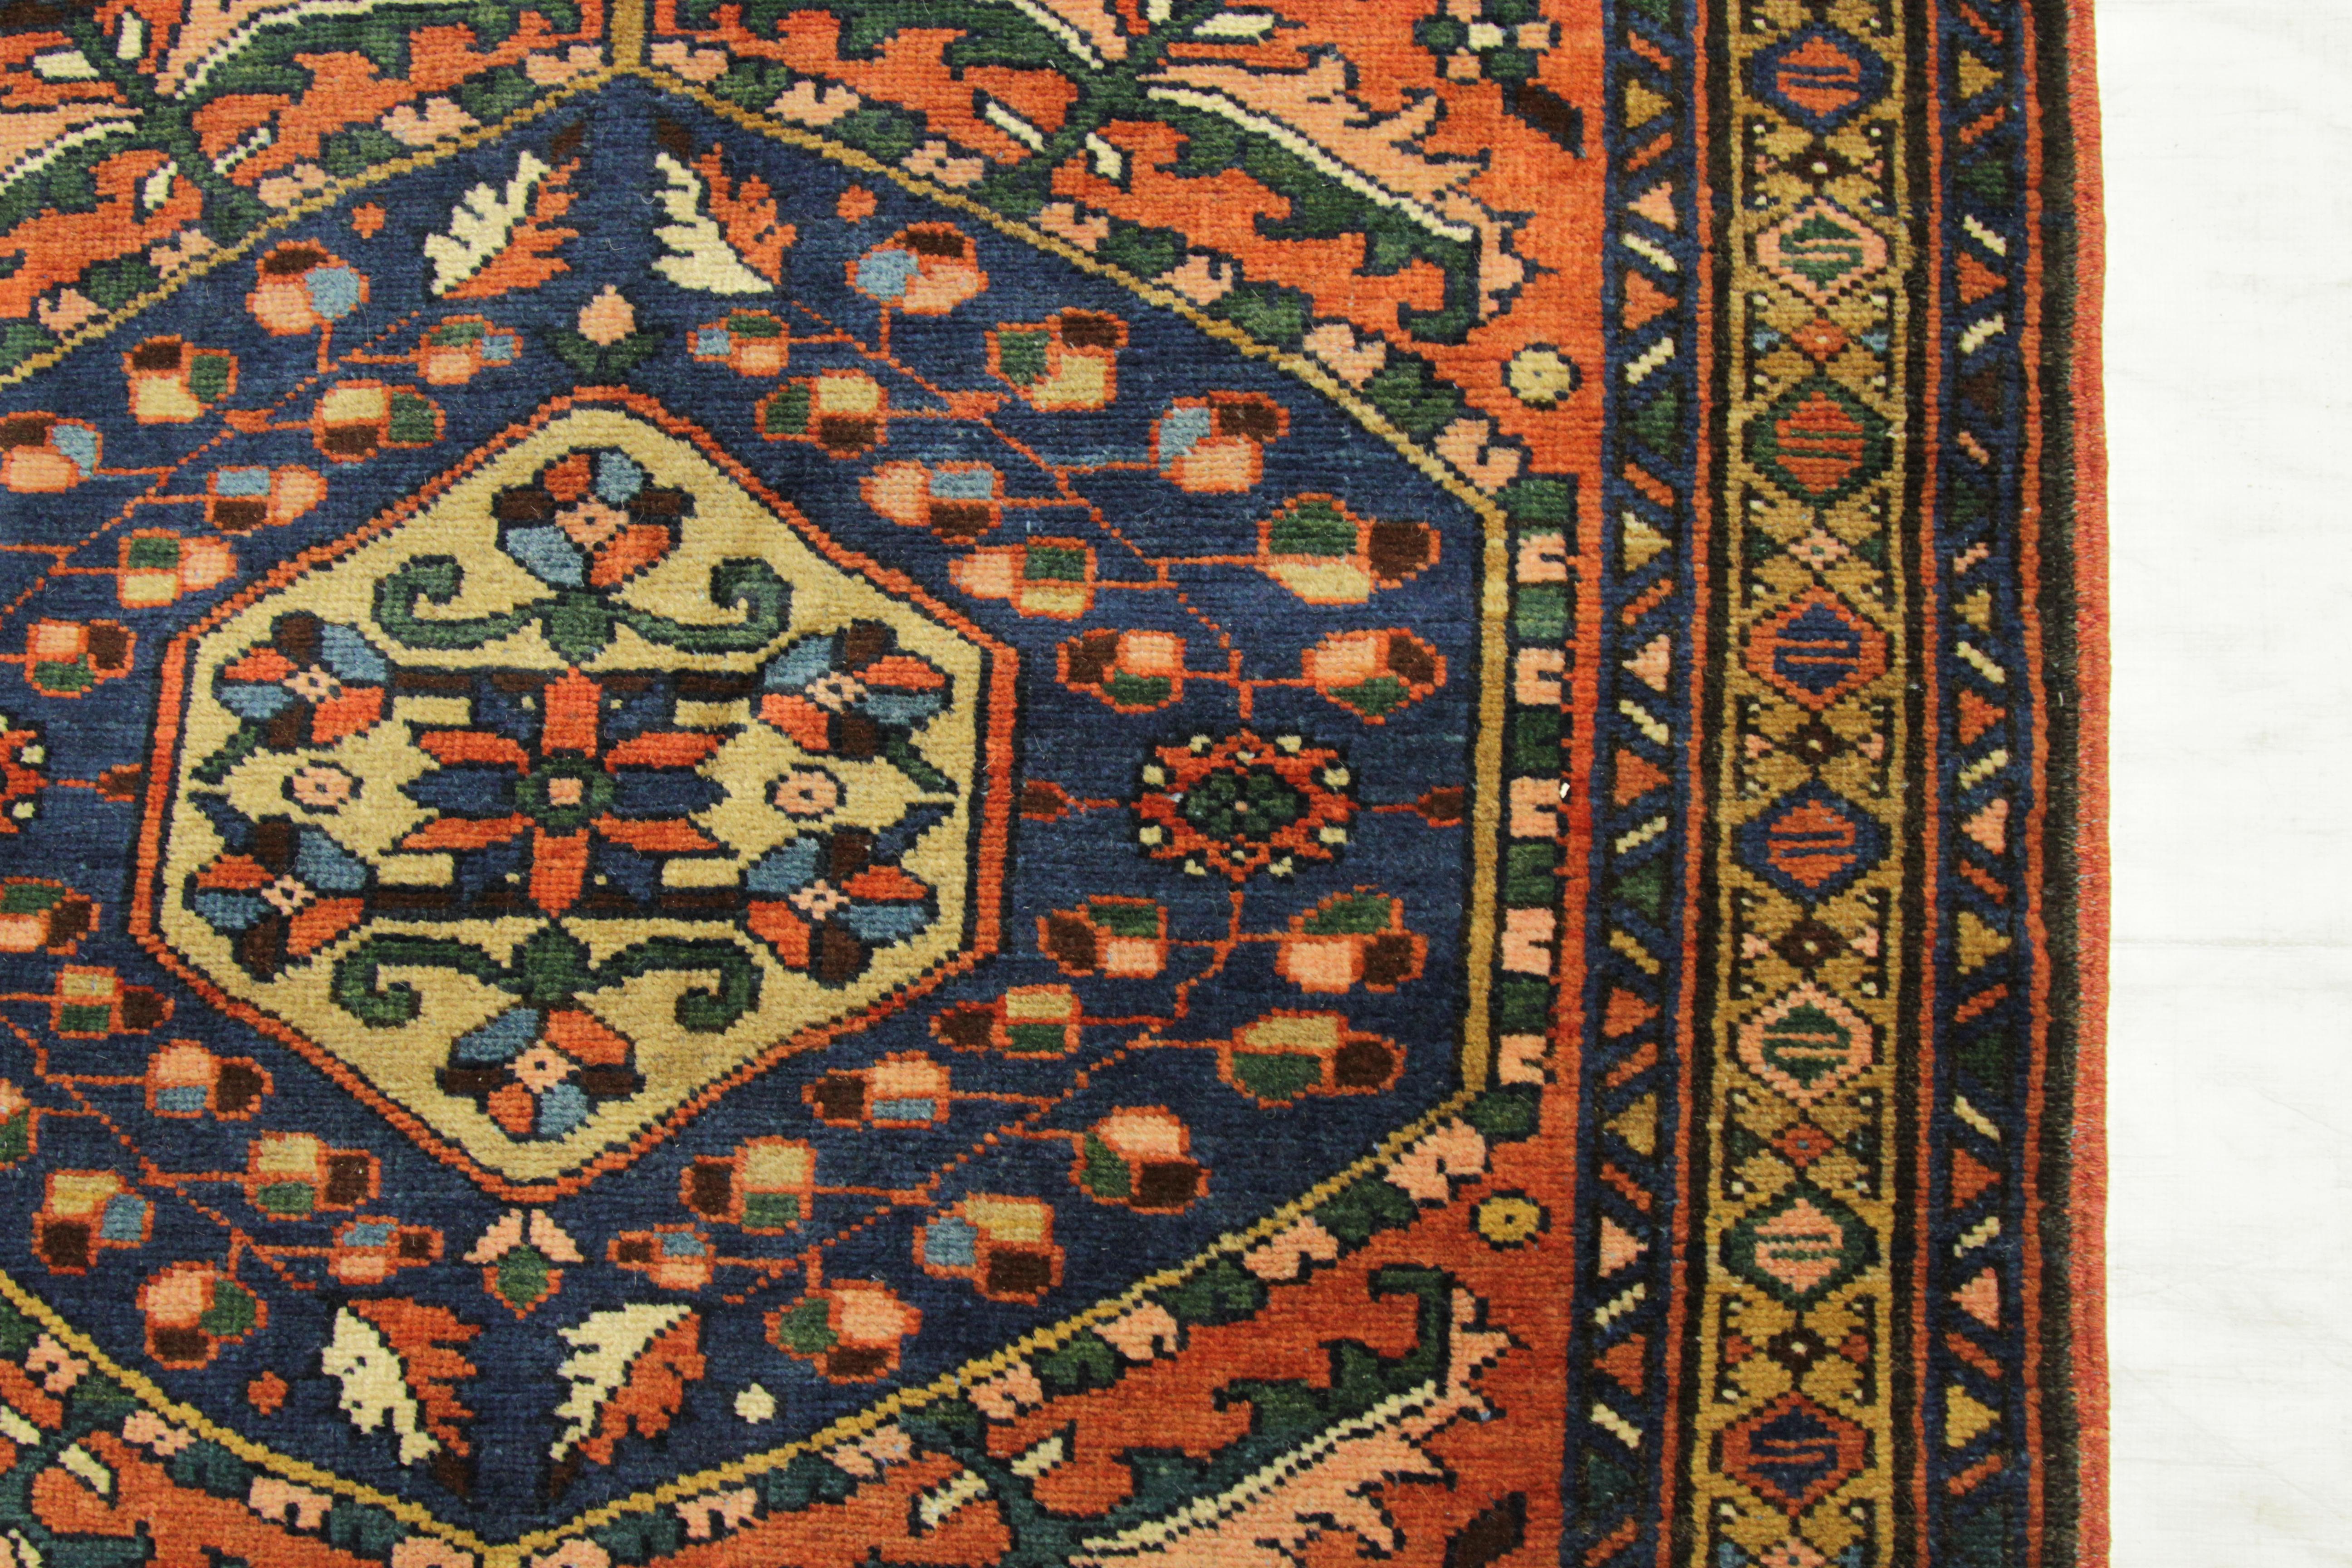 Antique Persian Rug Azerbaijan Design with Nature-Inspired Patterns, circa 1960s For Sale 3